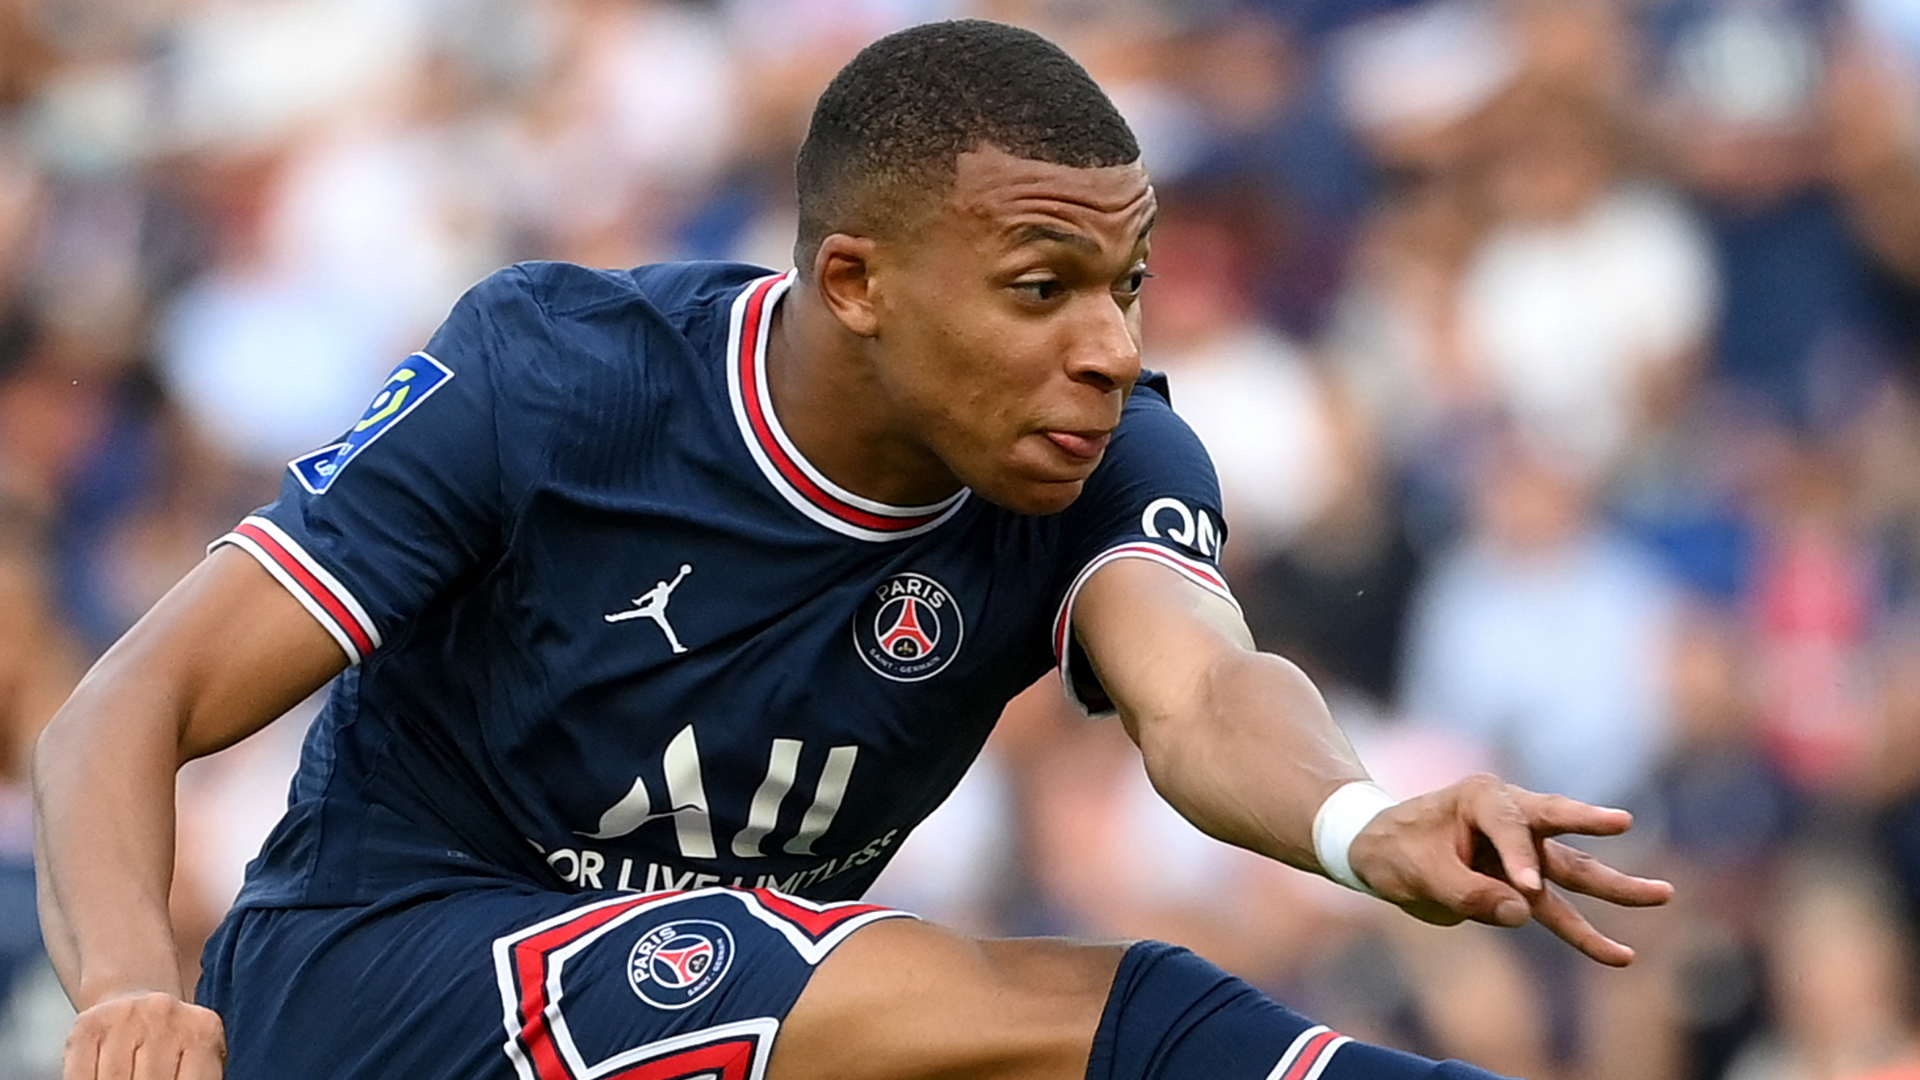 'Real Madrid must be punished!' - Mbappe pursuit continues to infuriate PSG sporting director Leonardo